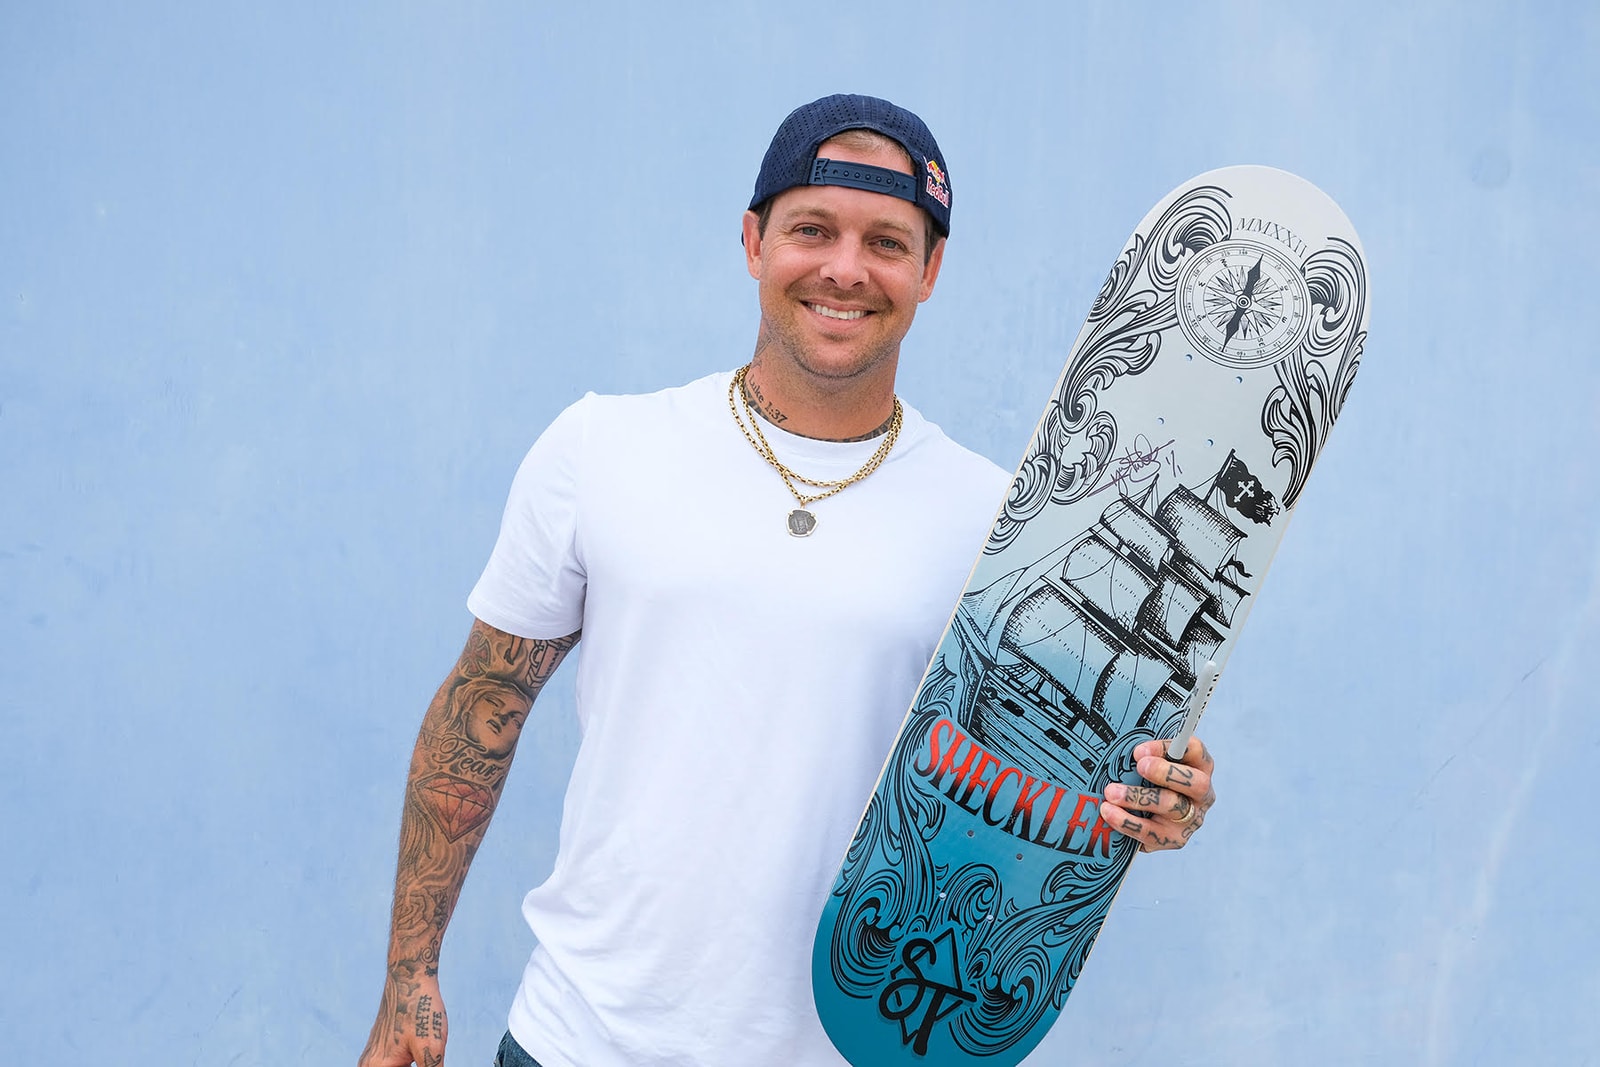 Ryan Sheckler Announced As First Pro For Sandlot Times